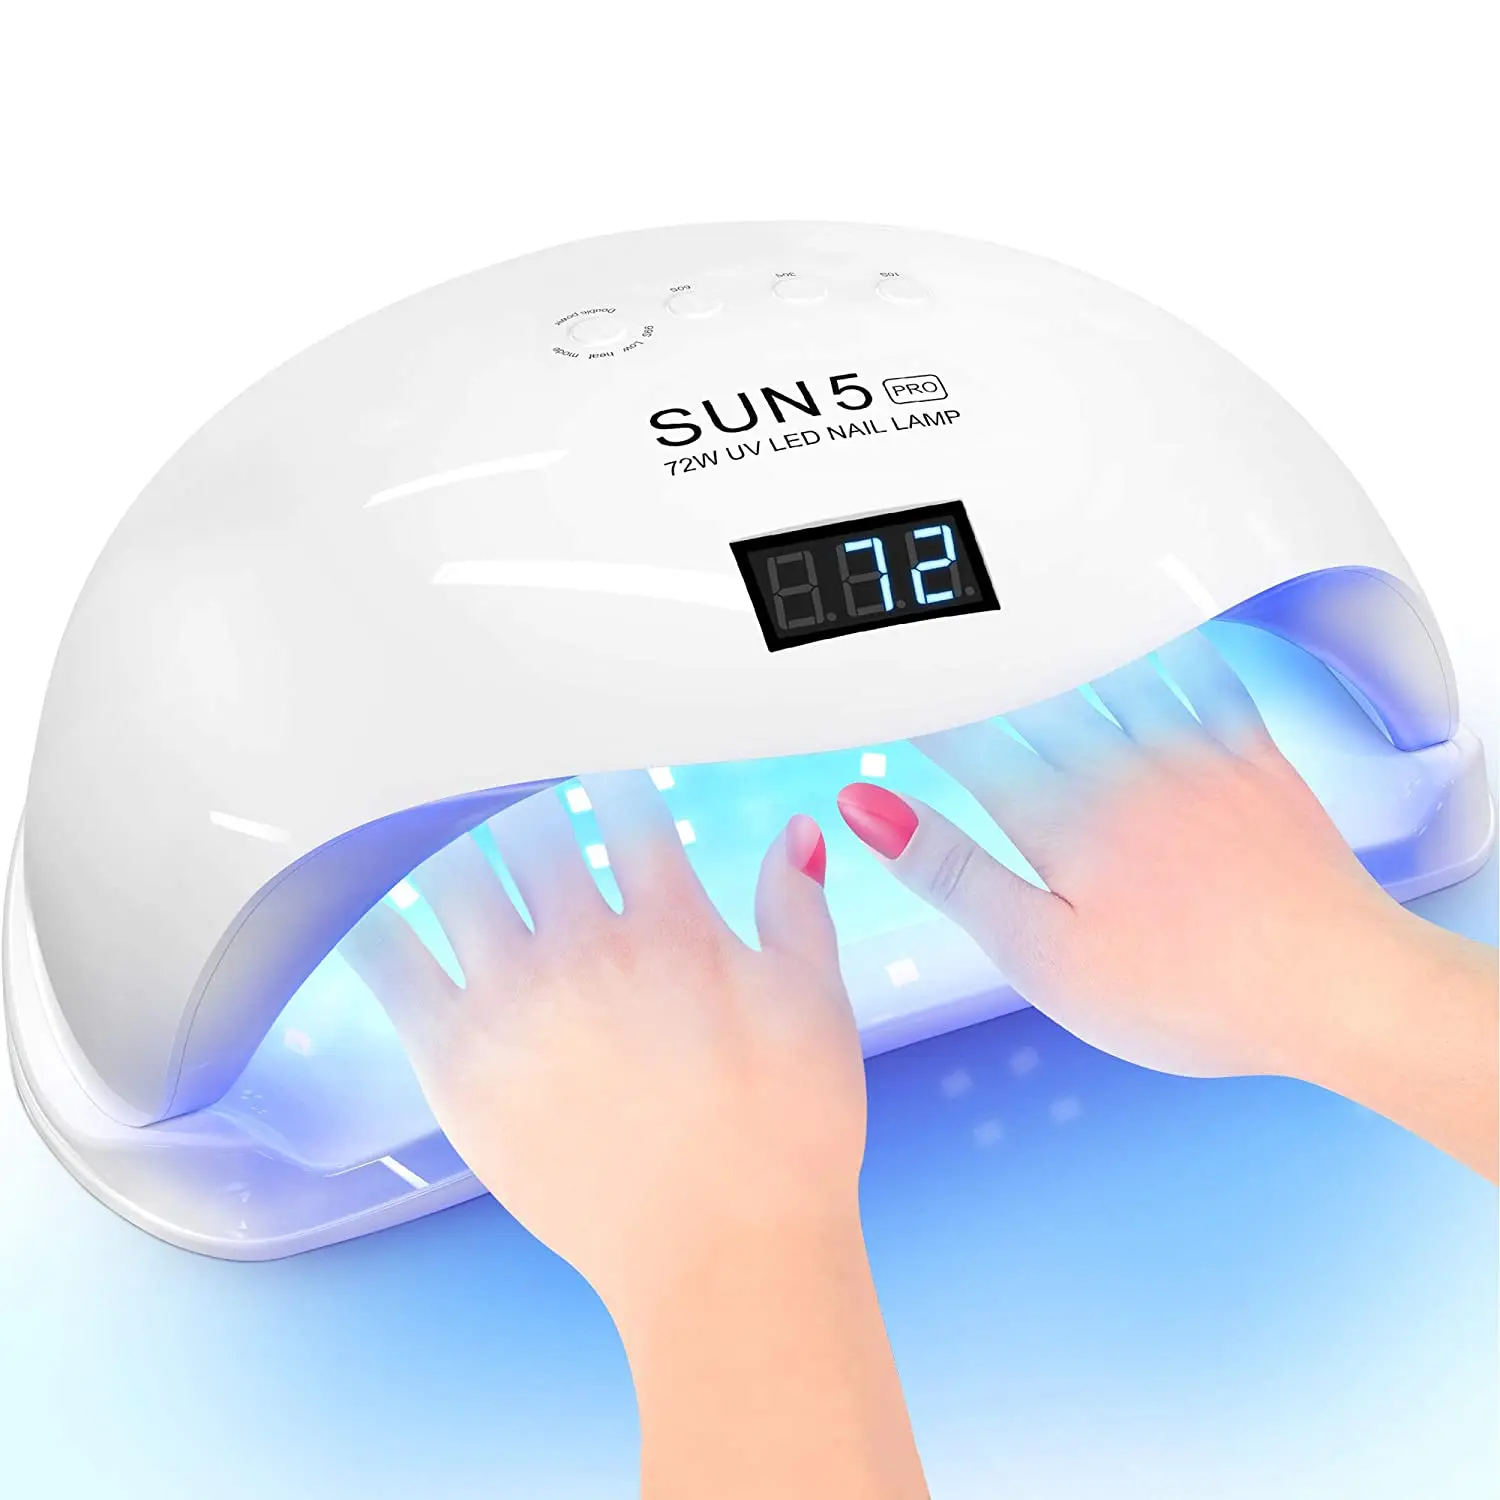 Professional Nail Dryer 72w Sun 5 Pro Best Uv Led Nail Lamp For Fingernail  & Toenail Gel Based Polishes - Buy Nail Polish Dryer Drops,Nails Dryer And  Accessories,Air Nail Dryer Product on